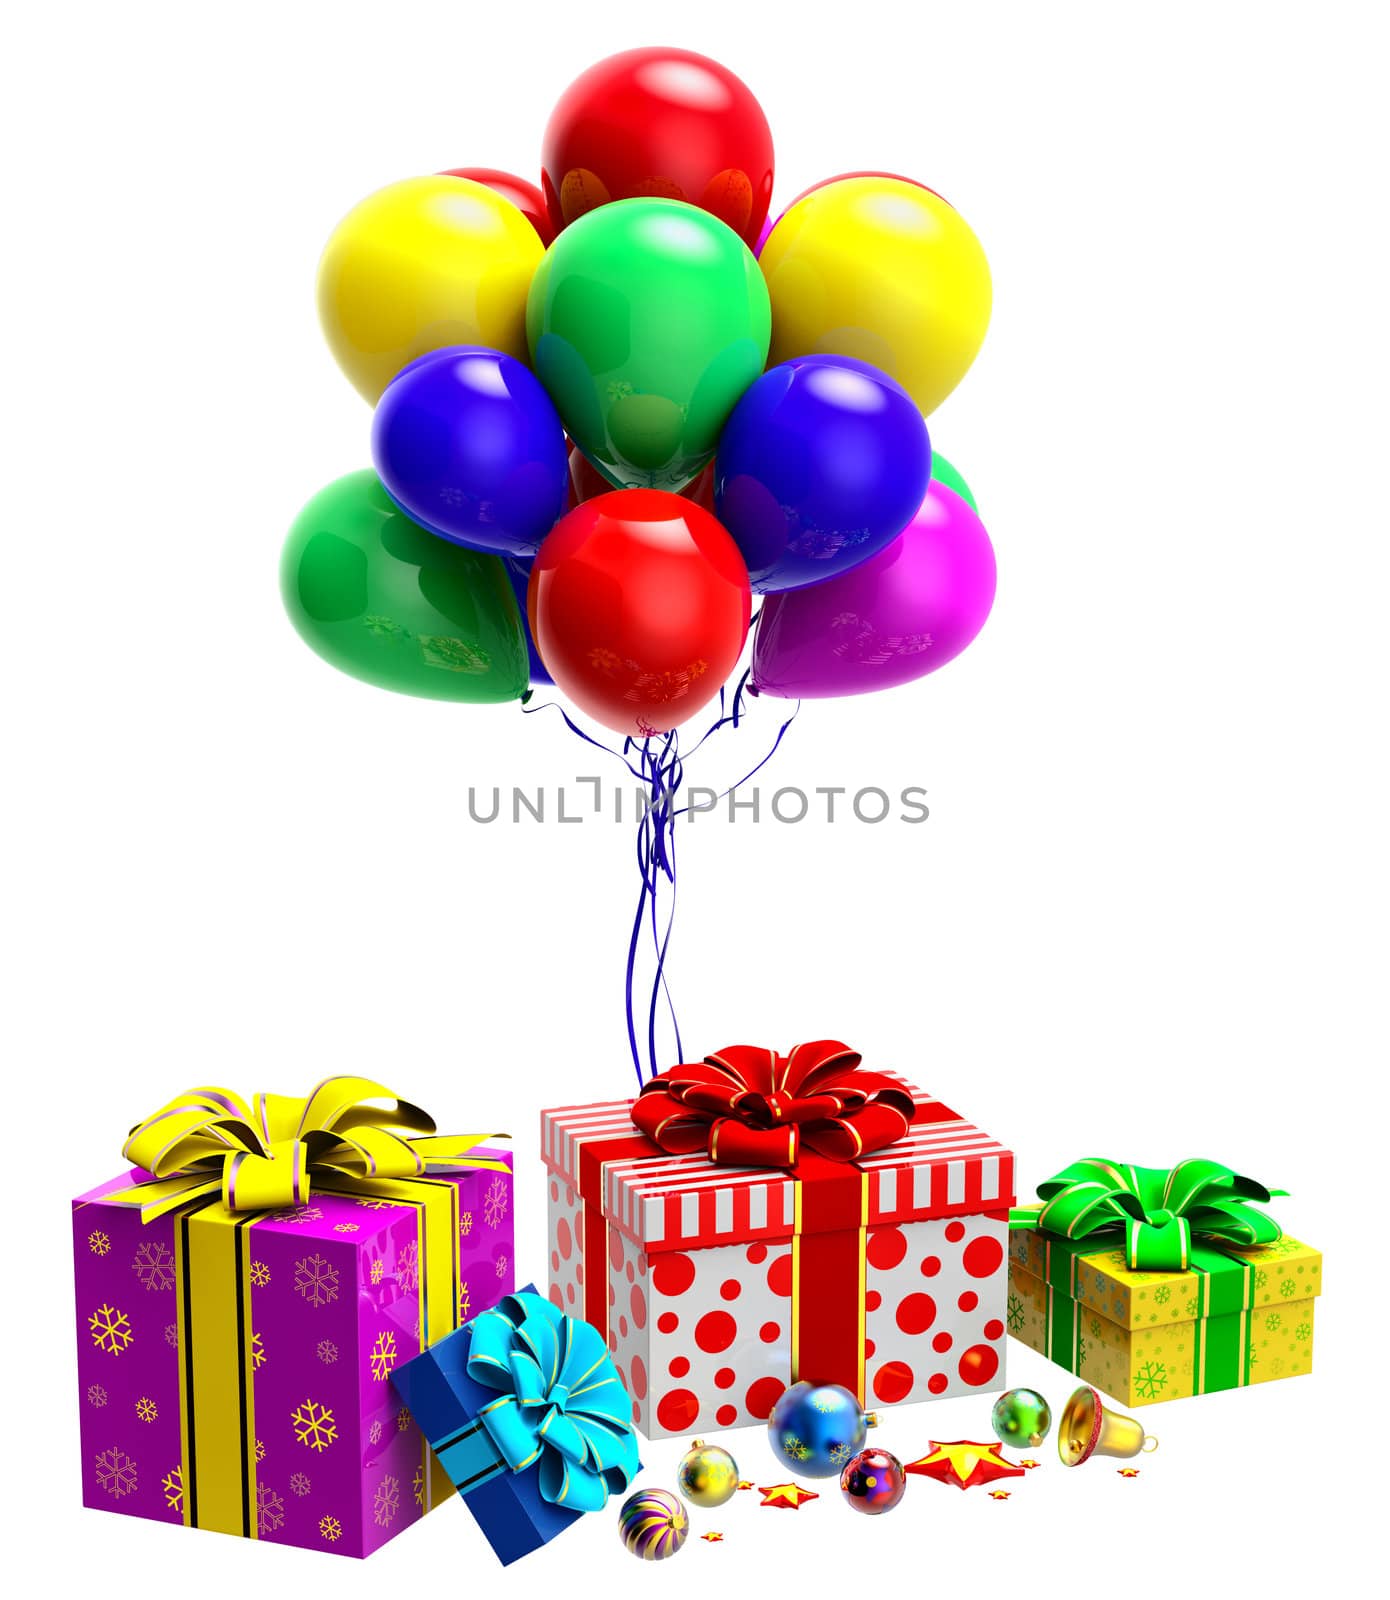 Christmas tree toys and set of pink, yellow, green and blue boxes ornamented with the snowflakes and decorated by bows and bunch of balloons as gifts